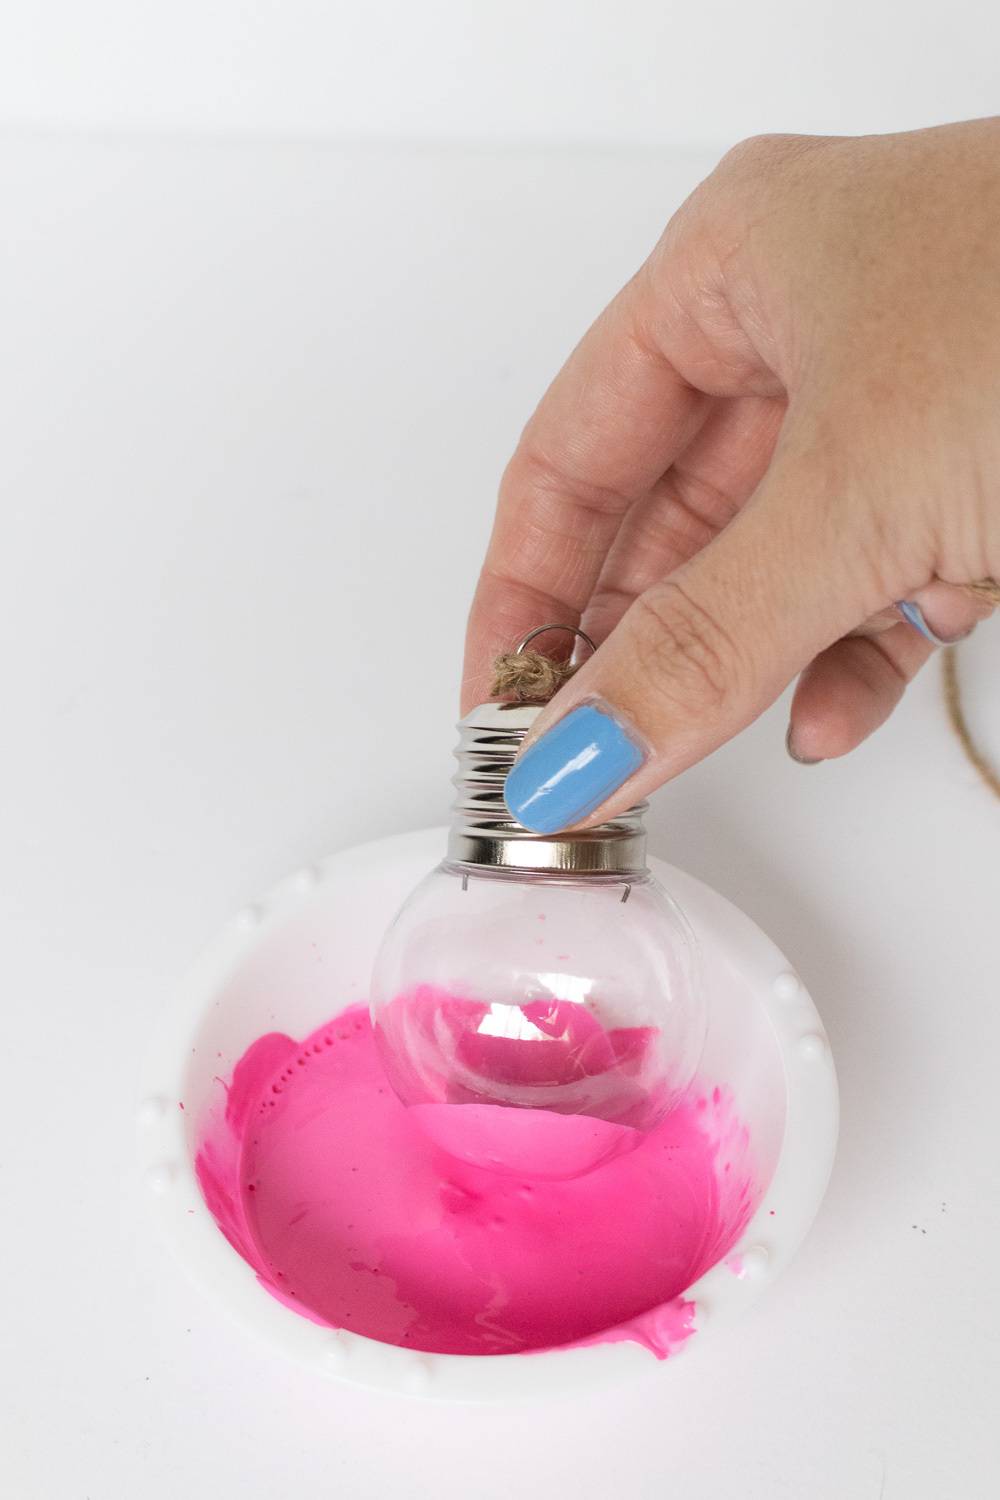 A person with blue nail polish holding an ornament with pink fluid in it.